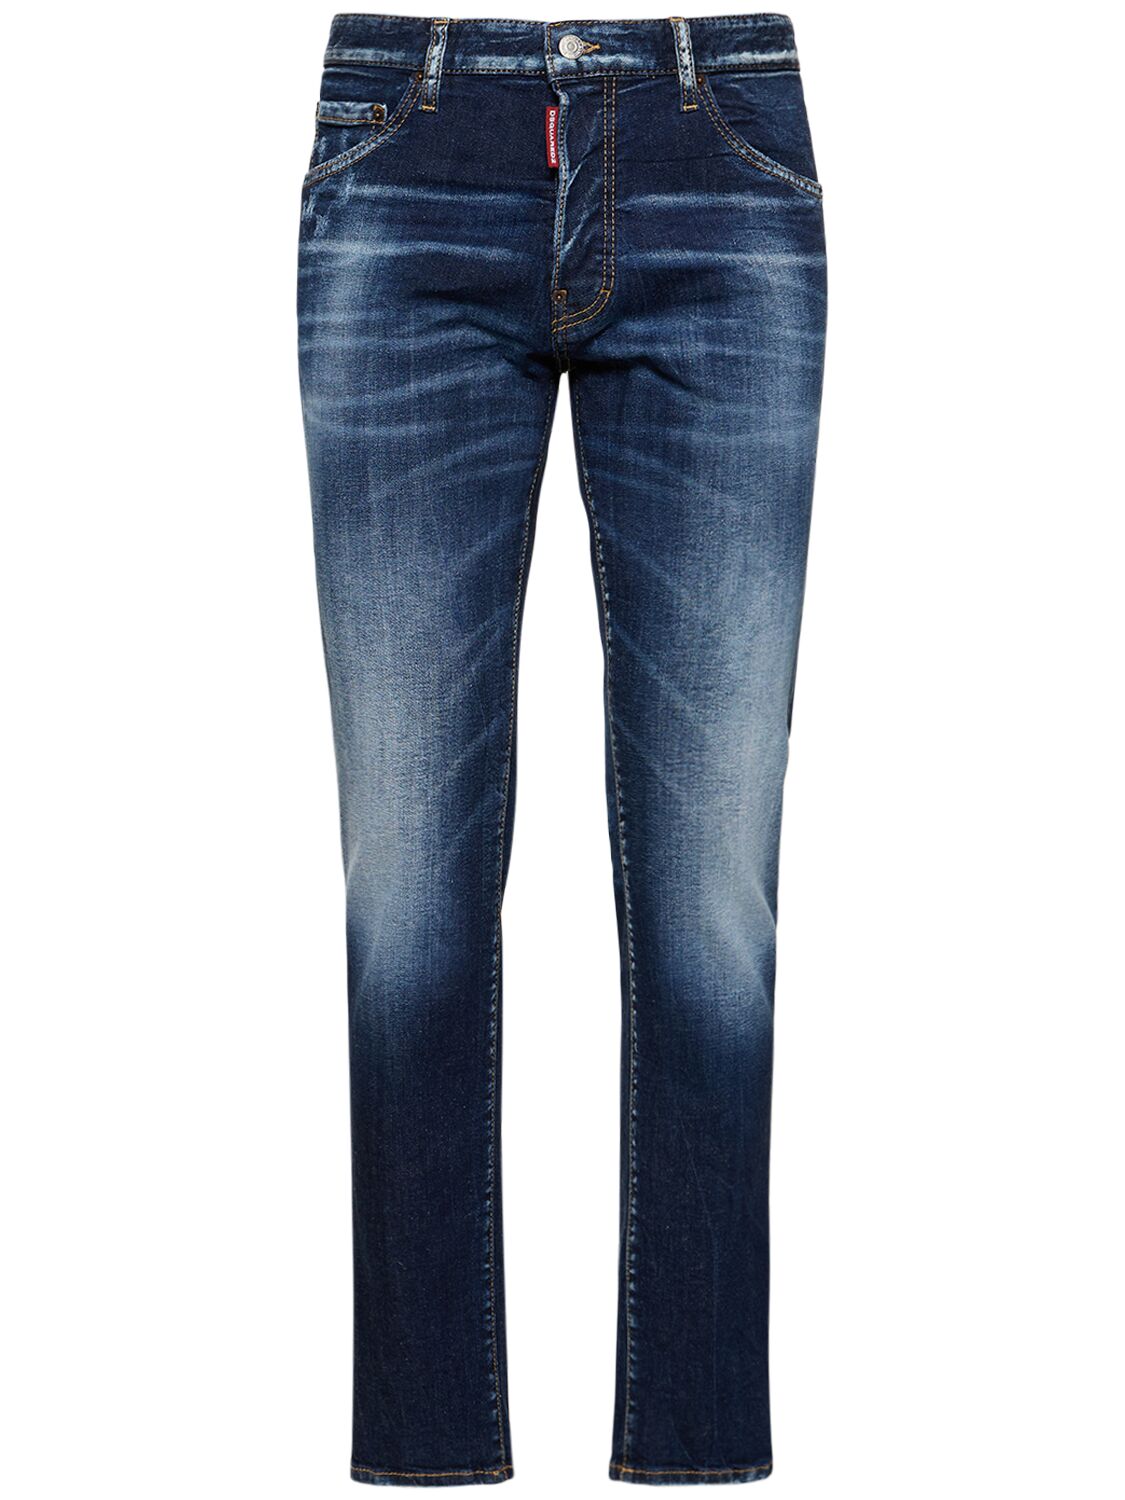 Image of Cool Guy Cotton Denim Jeans